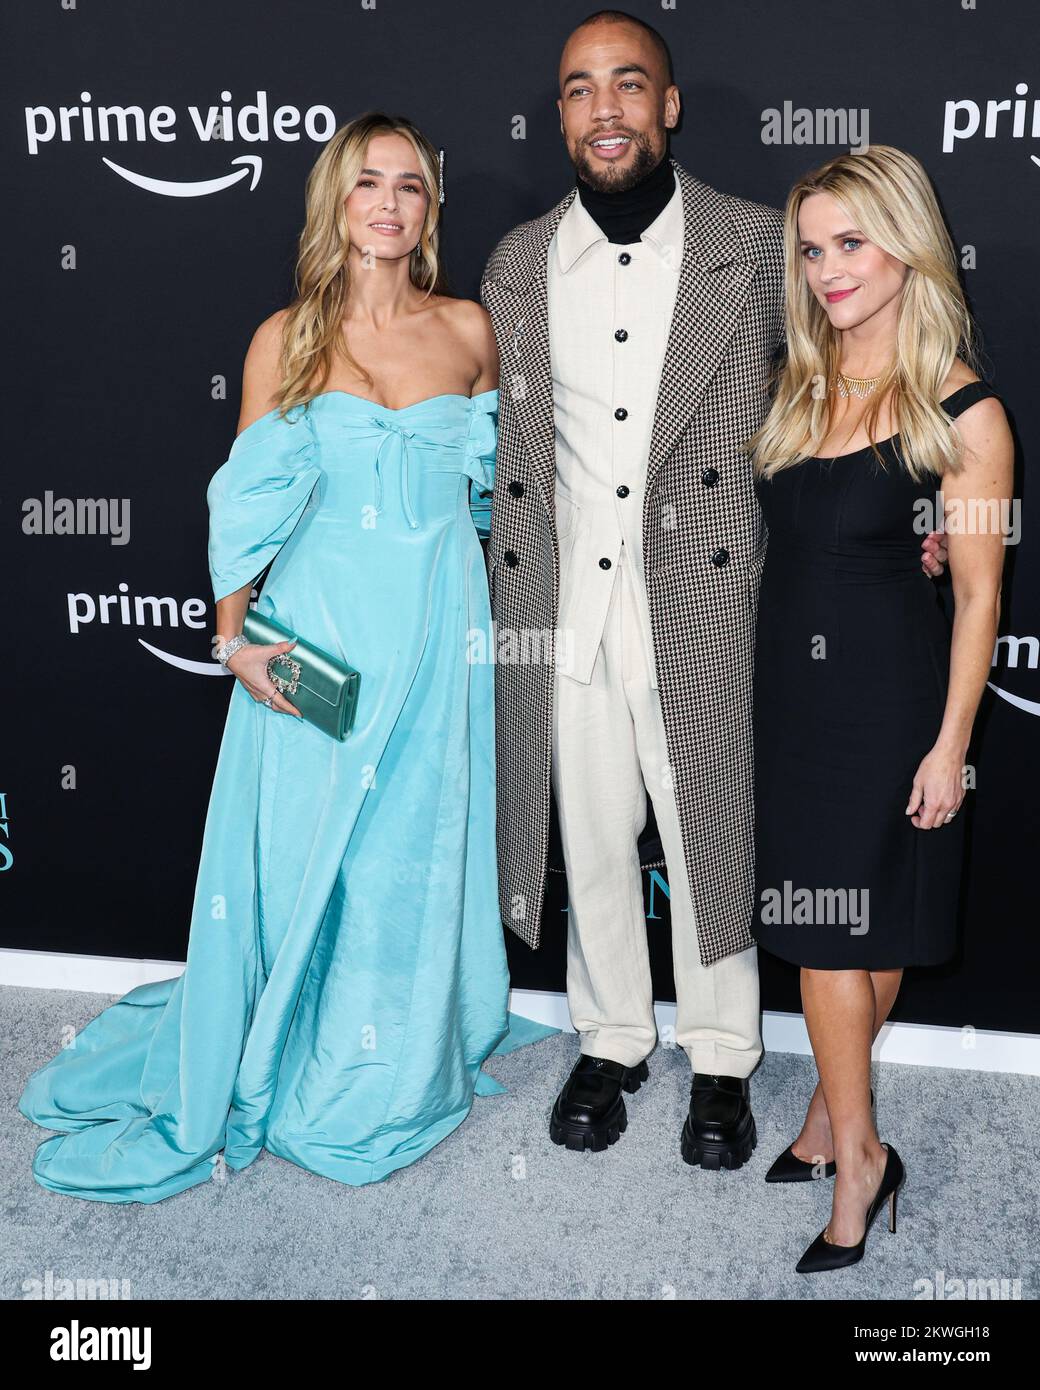 CENTURY CITY, LOS ANGELES, CALIFORNIA, USA - NOVEMBER 29: Zoey Deutch, Kendrick Sampson and Reese Witherspoon arrive at the Los Angeles Premiere Of Amazon Prime Video's 'Something From Tiffany's' held at AMC Century City 15 at Westfield Century City on November 29, 2022 in Century City, Los Angeles, California, United States. (Photo by Xavier Collin/Image Press Agency) Stock Photo